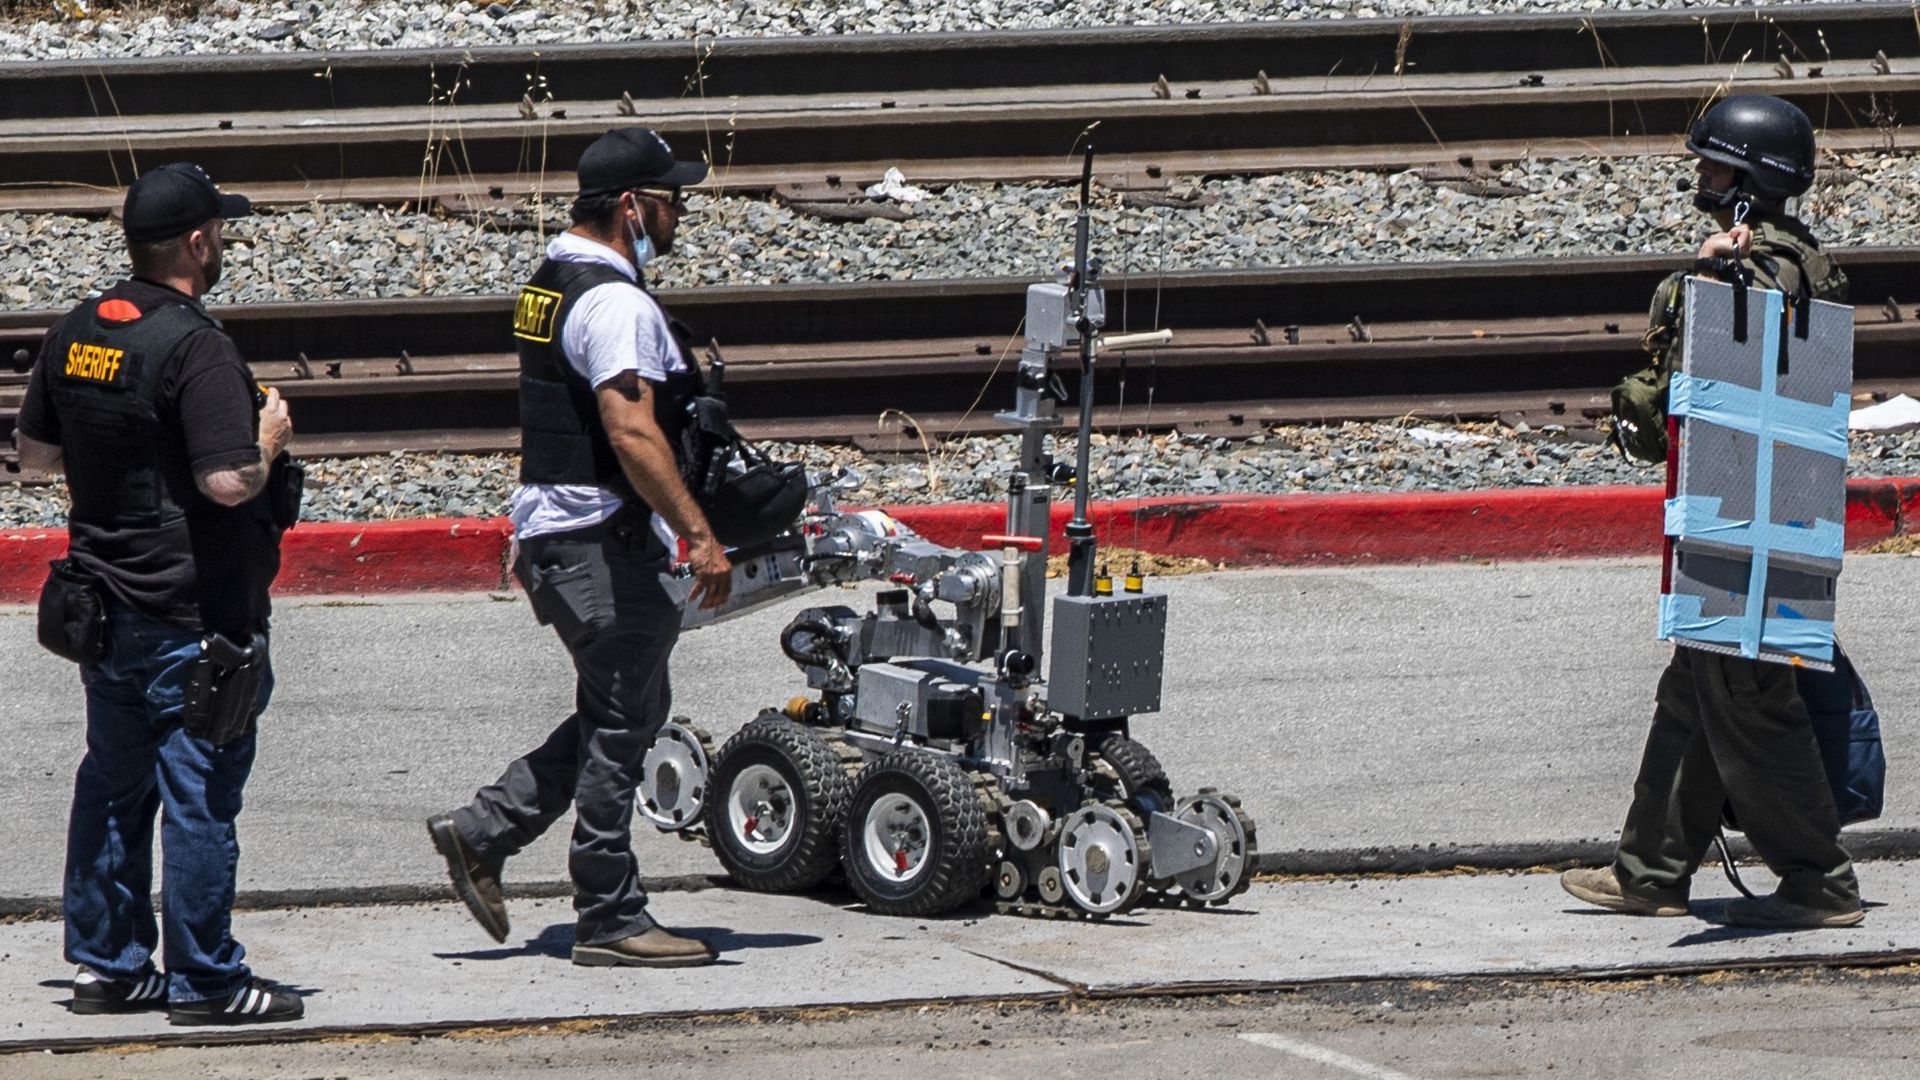 Santa Clara County Sheriff's Office uses a robot similar to one the SFPD owns.